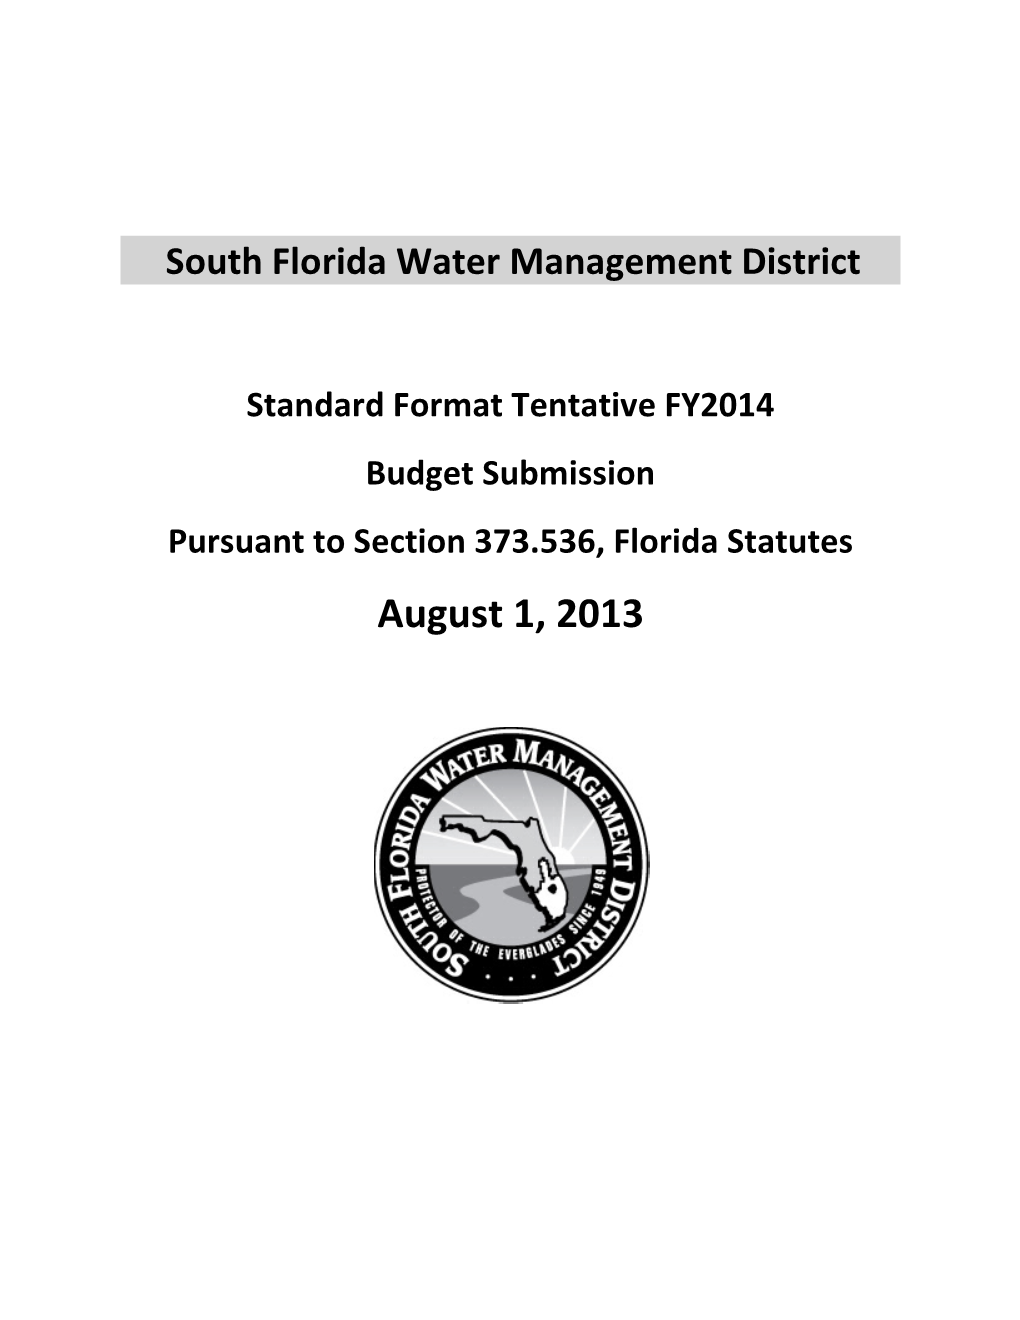 SFWMD FY2014 Tentative Budget Submission